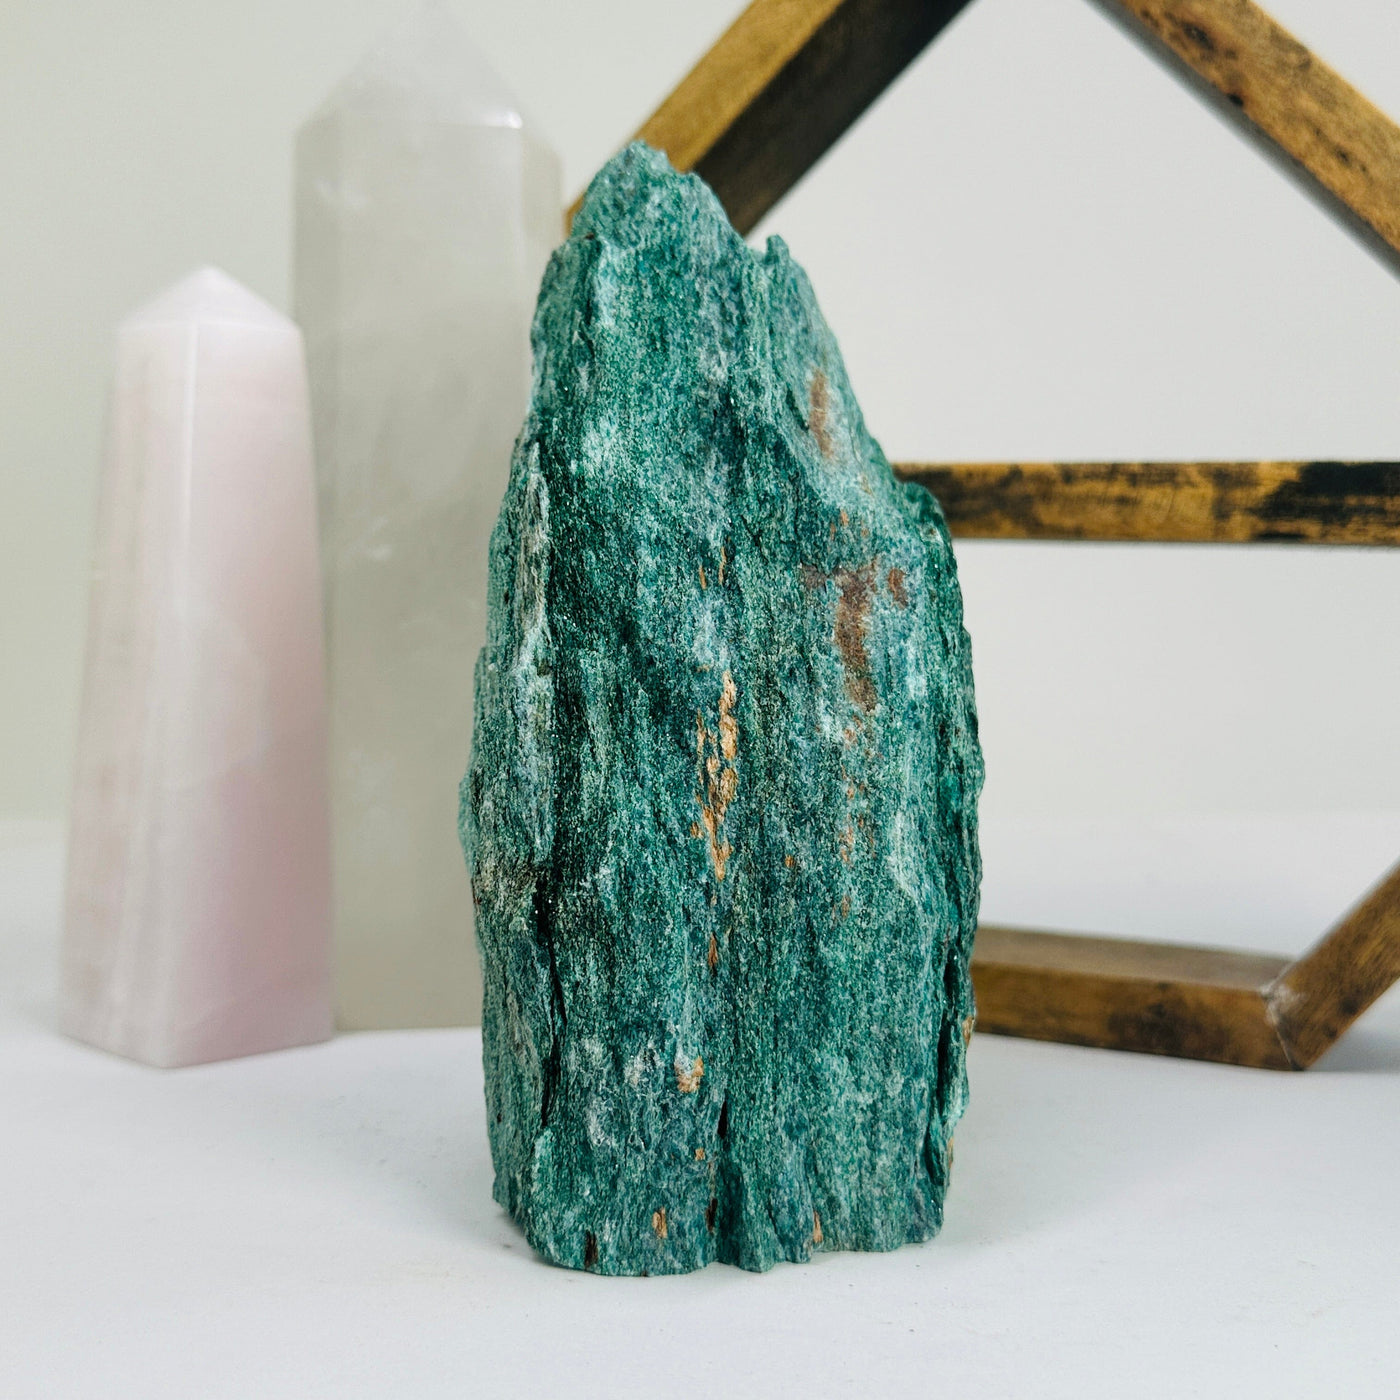 fuchsite cut base with decorations in the background